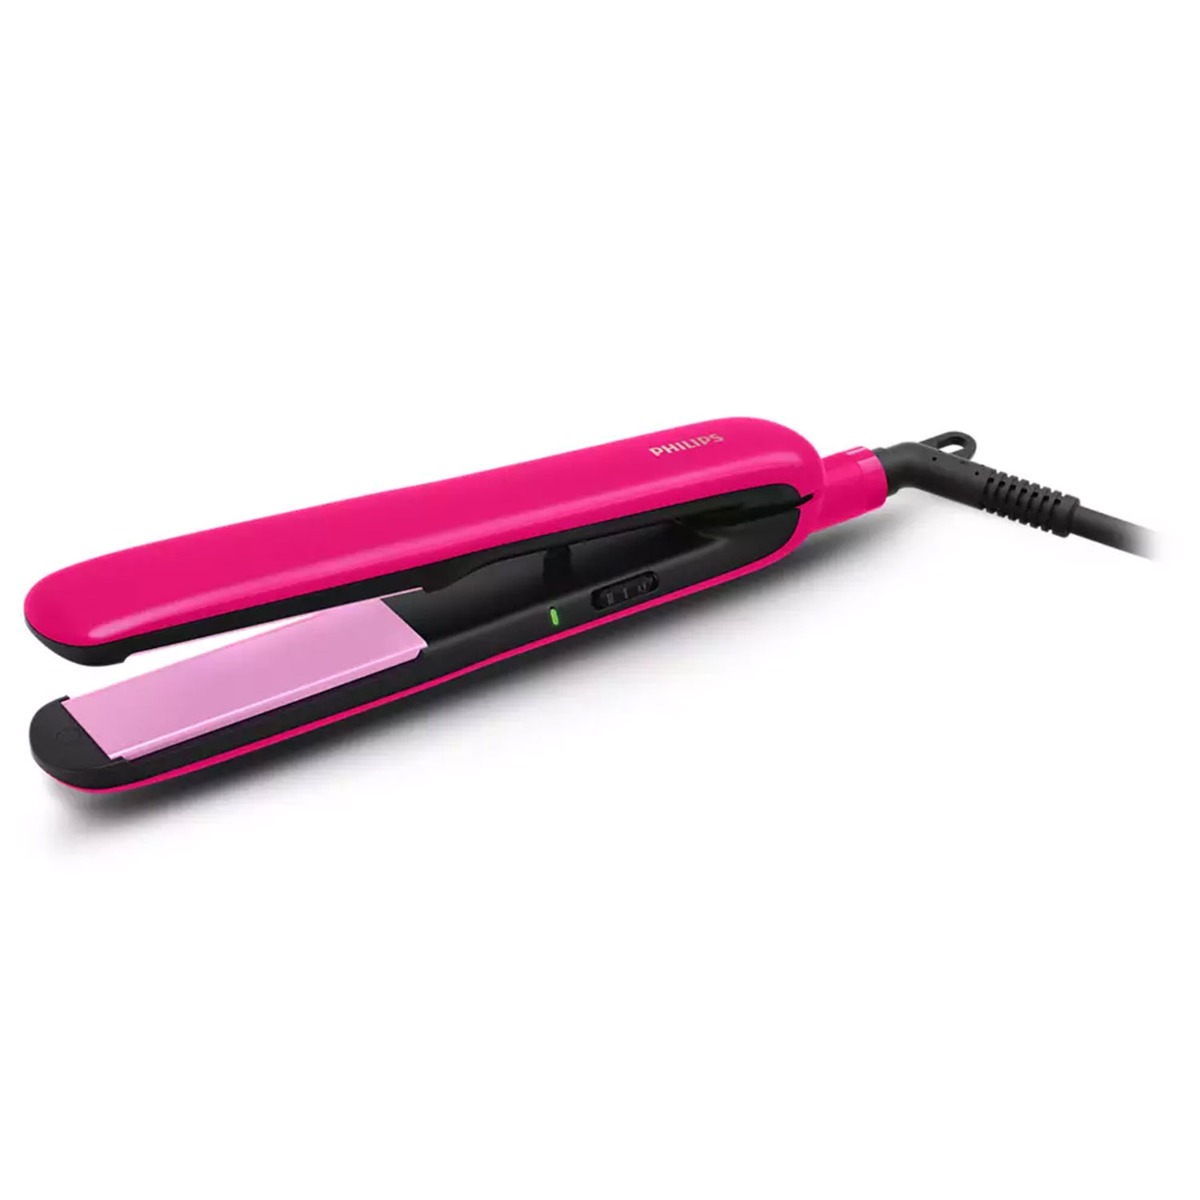 Philips Straightener With Silkprotect Technology, BHS393/00